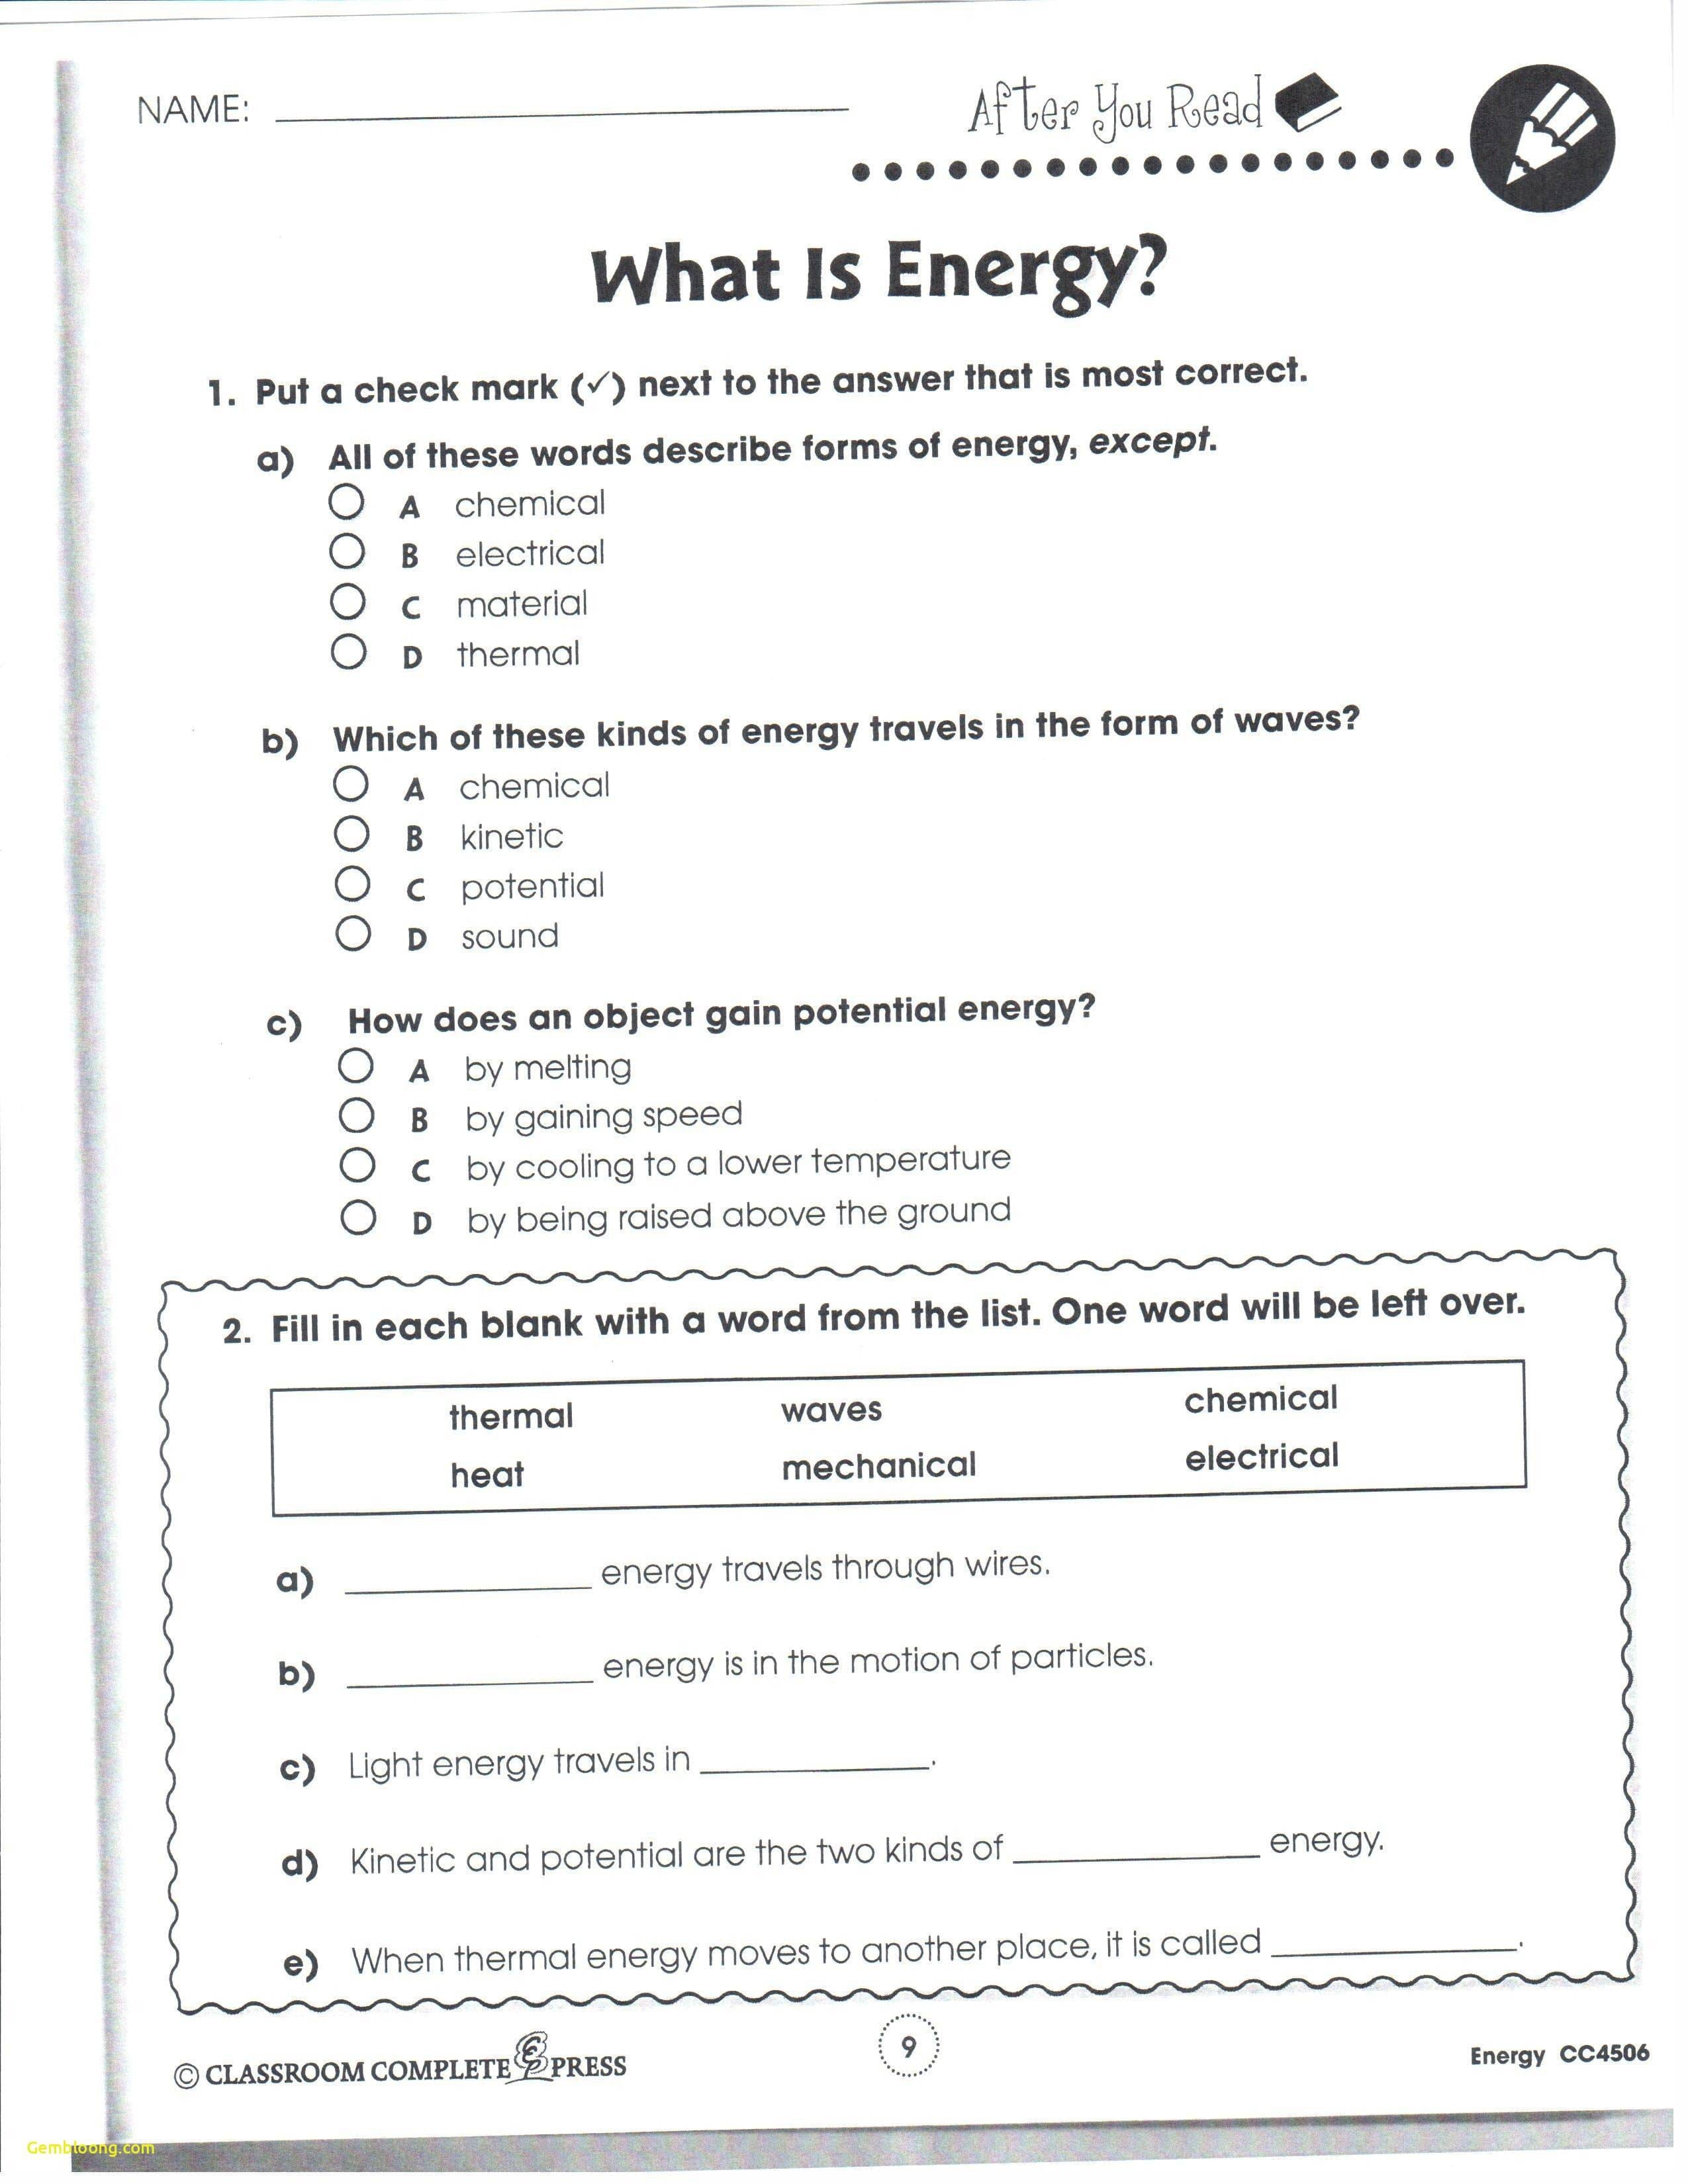 nuclear-fission-and-fusion-worksheet-cramerforcongress-db-excel